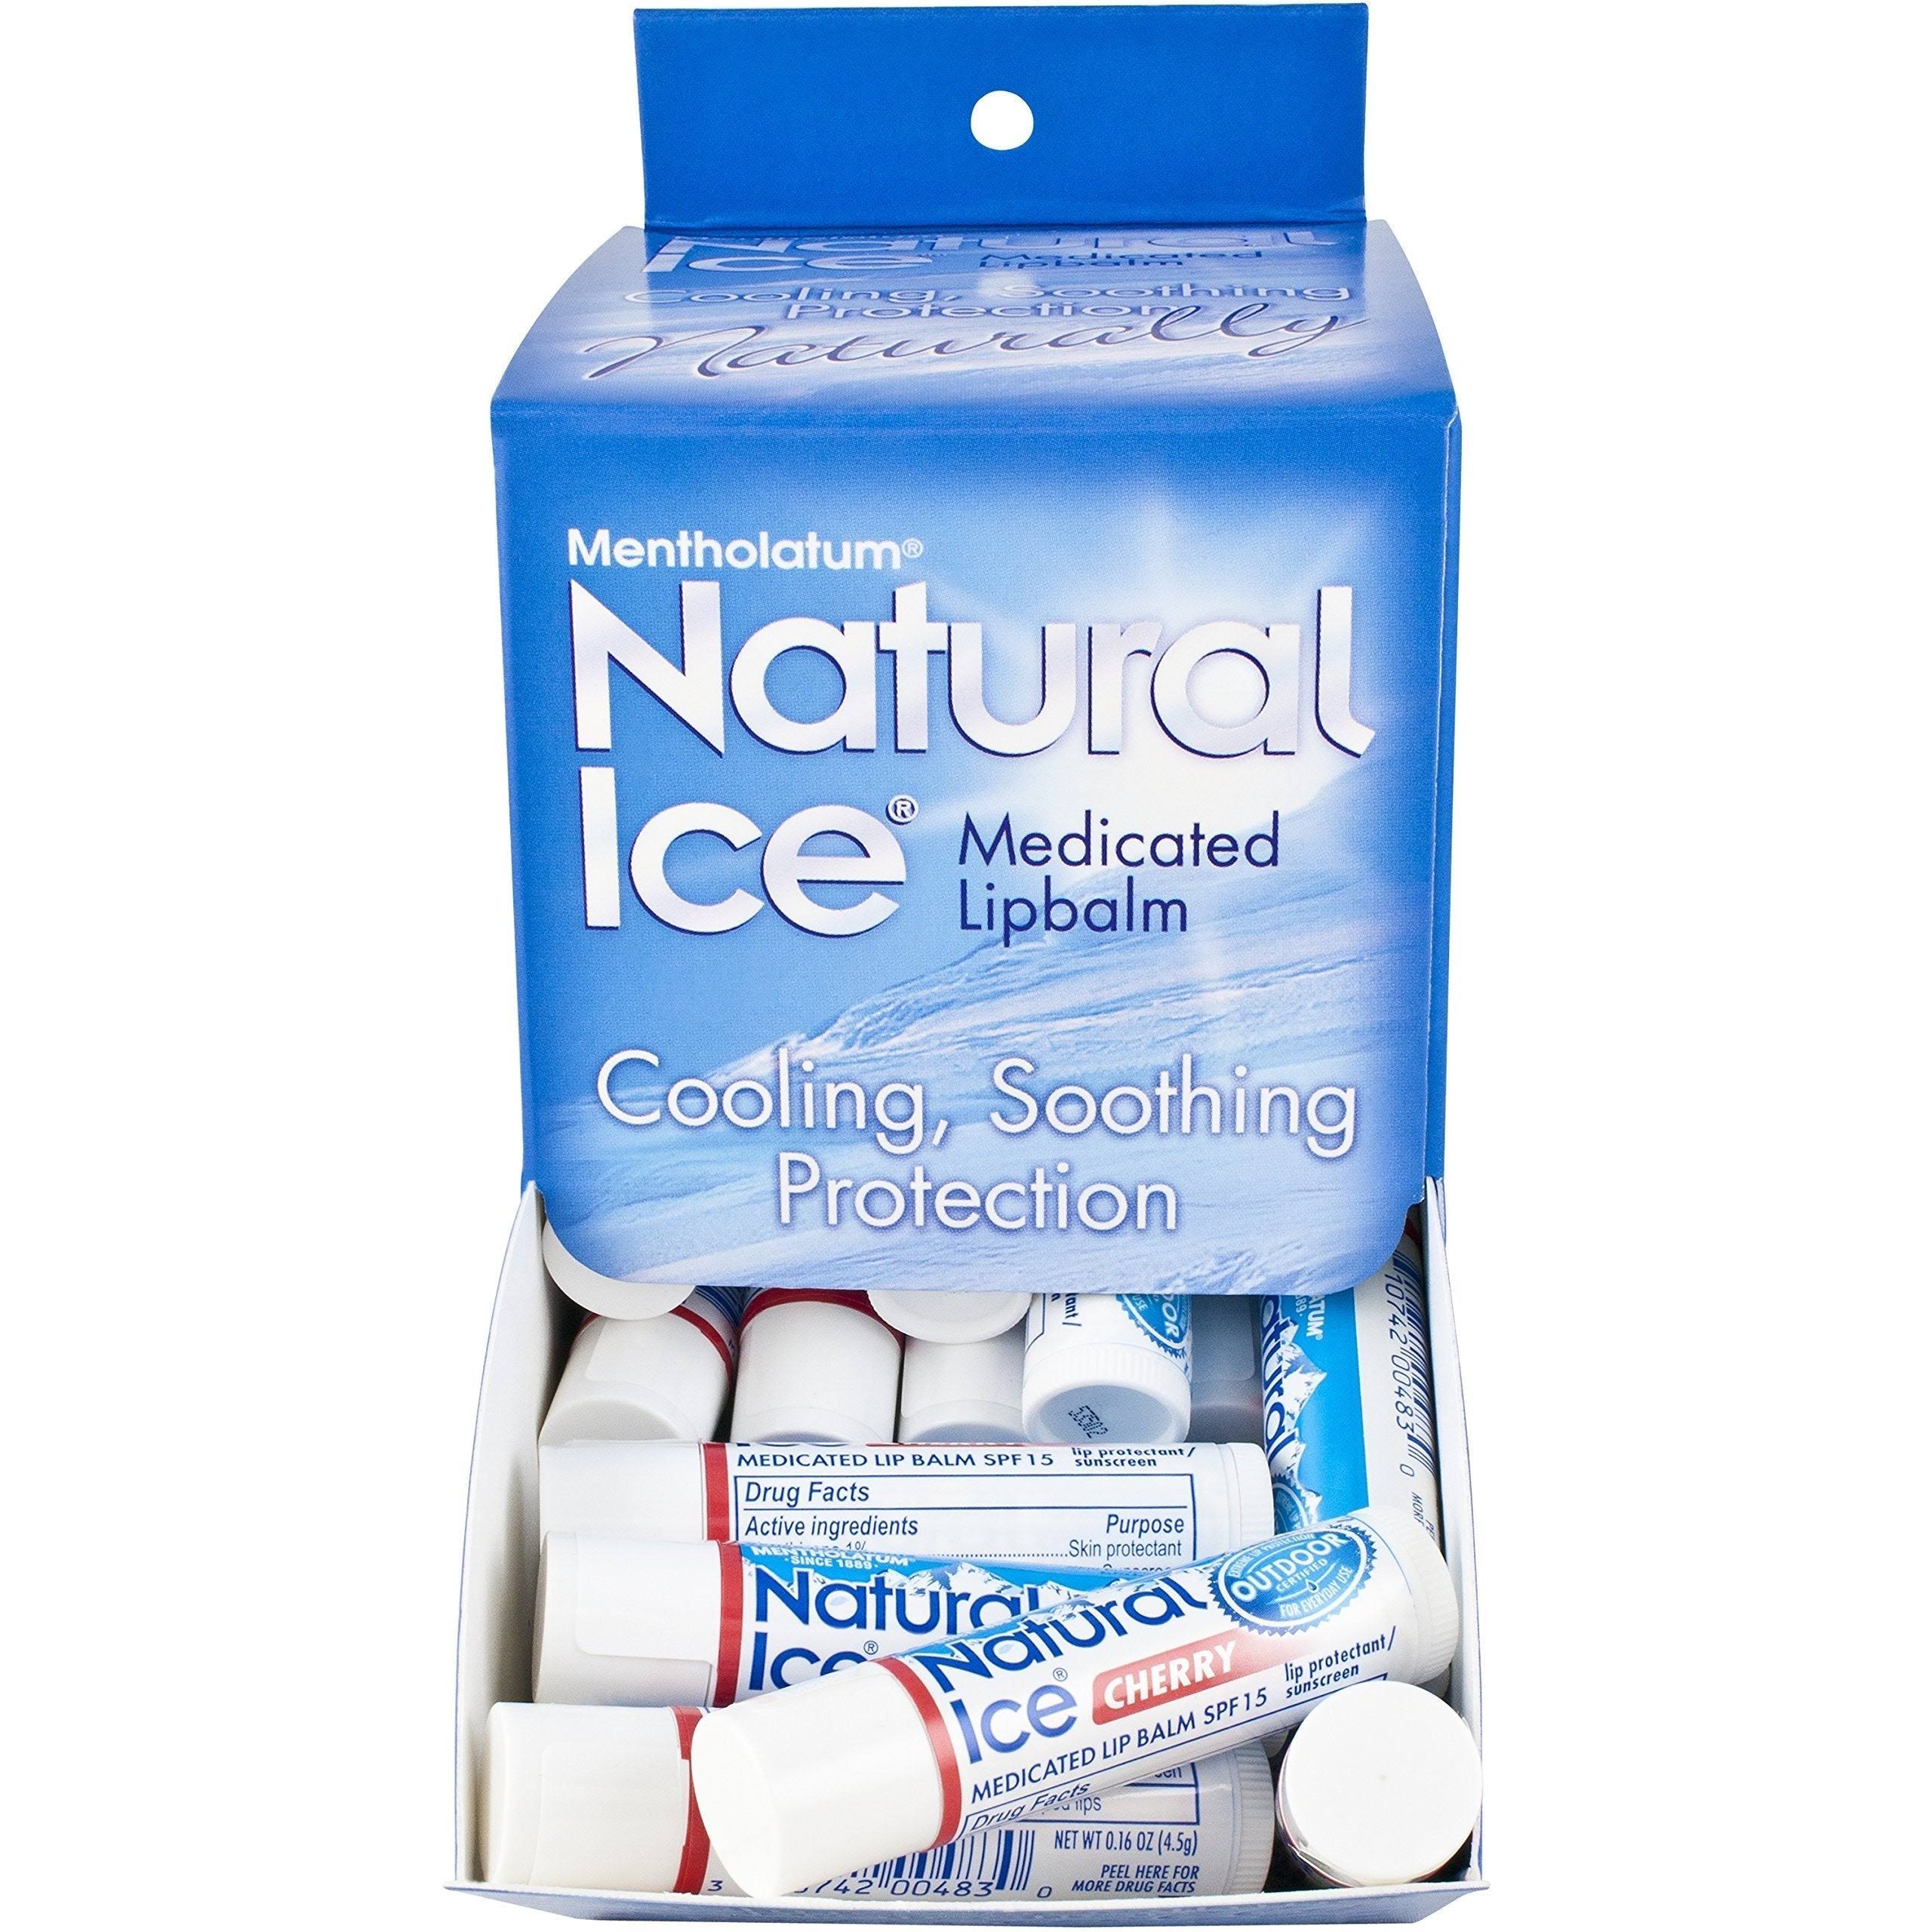 Natural Ice Cherry, 5ml Tubes (Pack of 48)